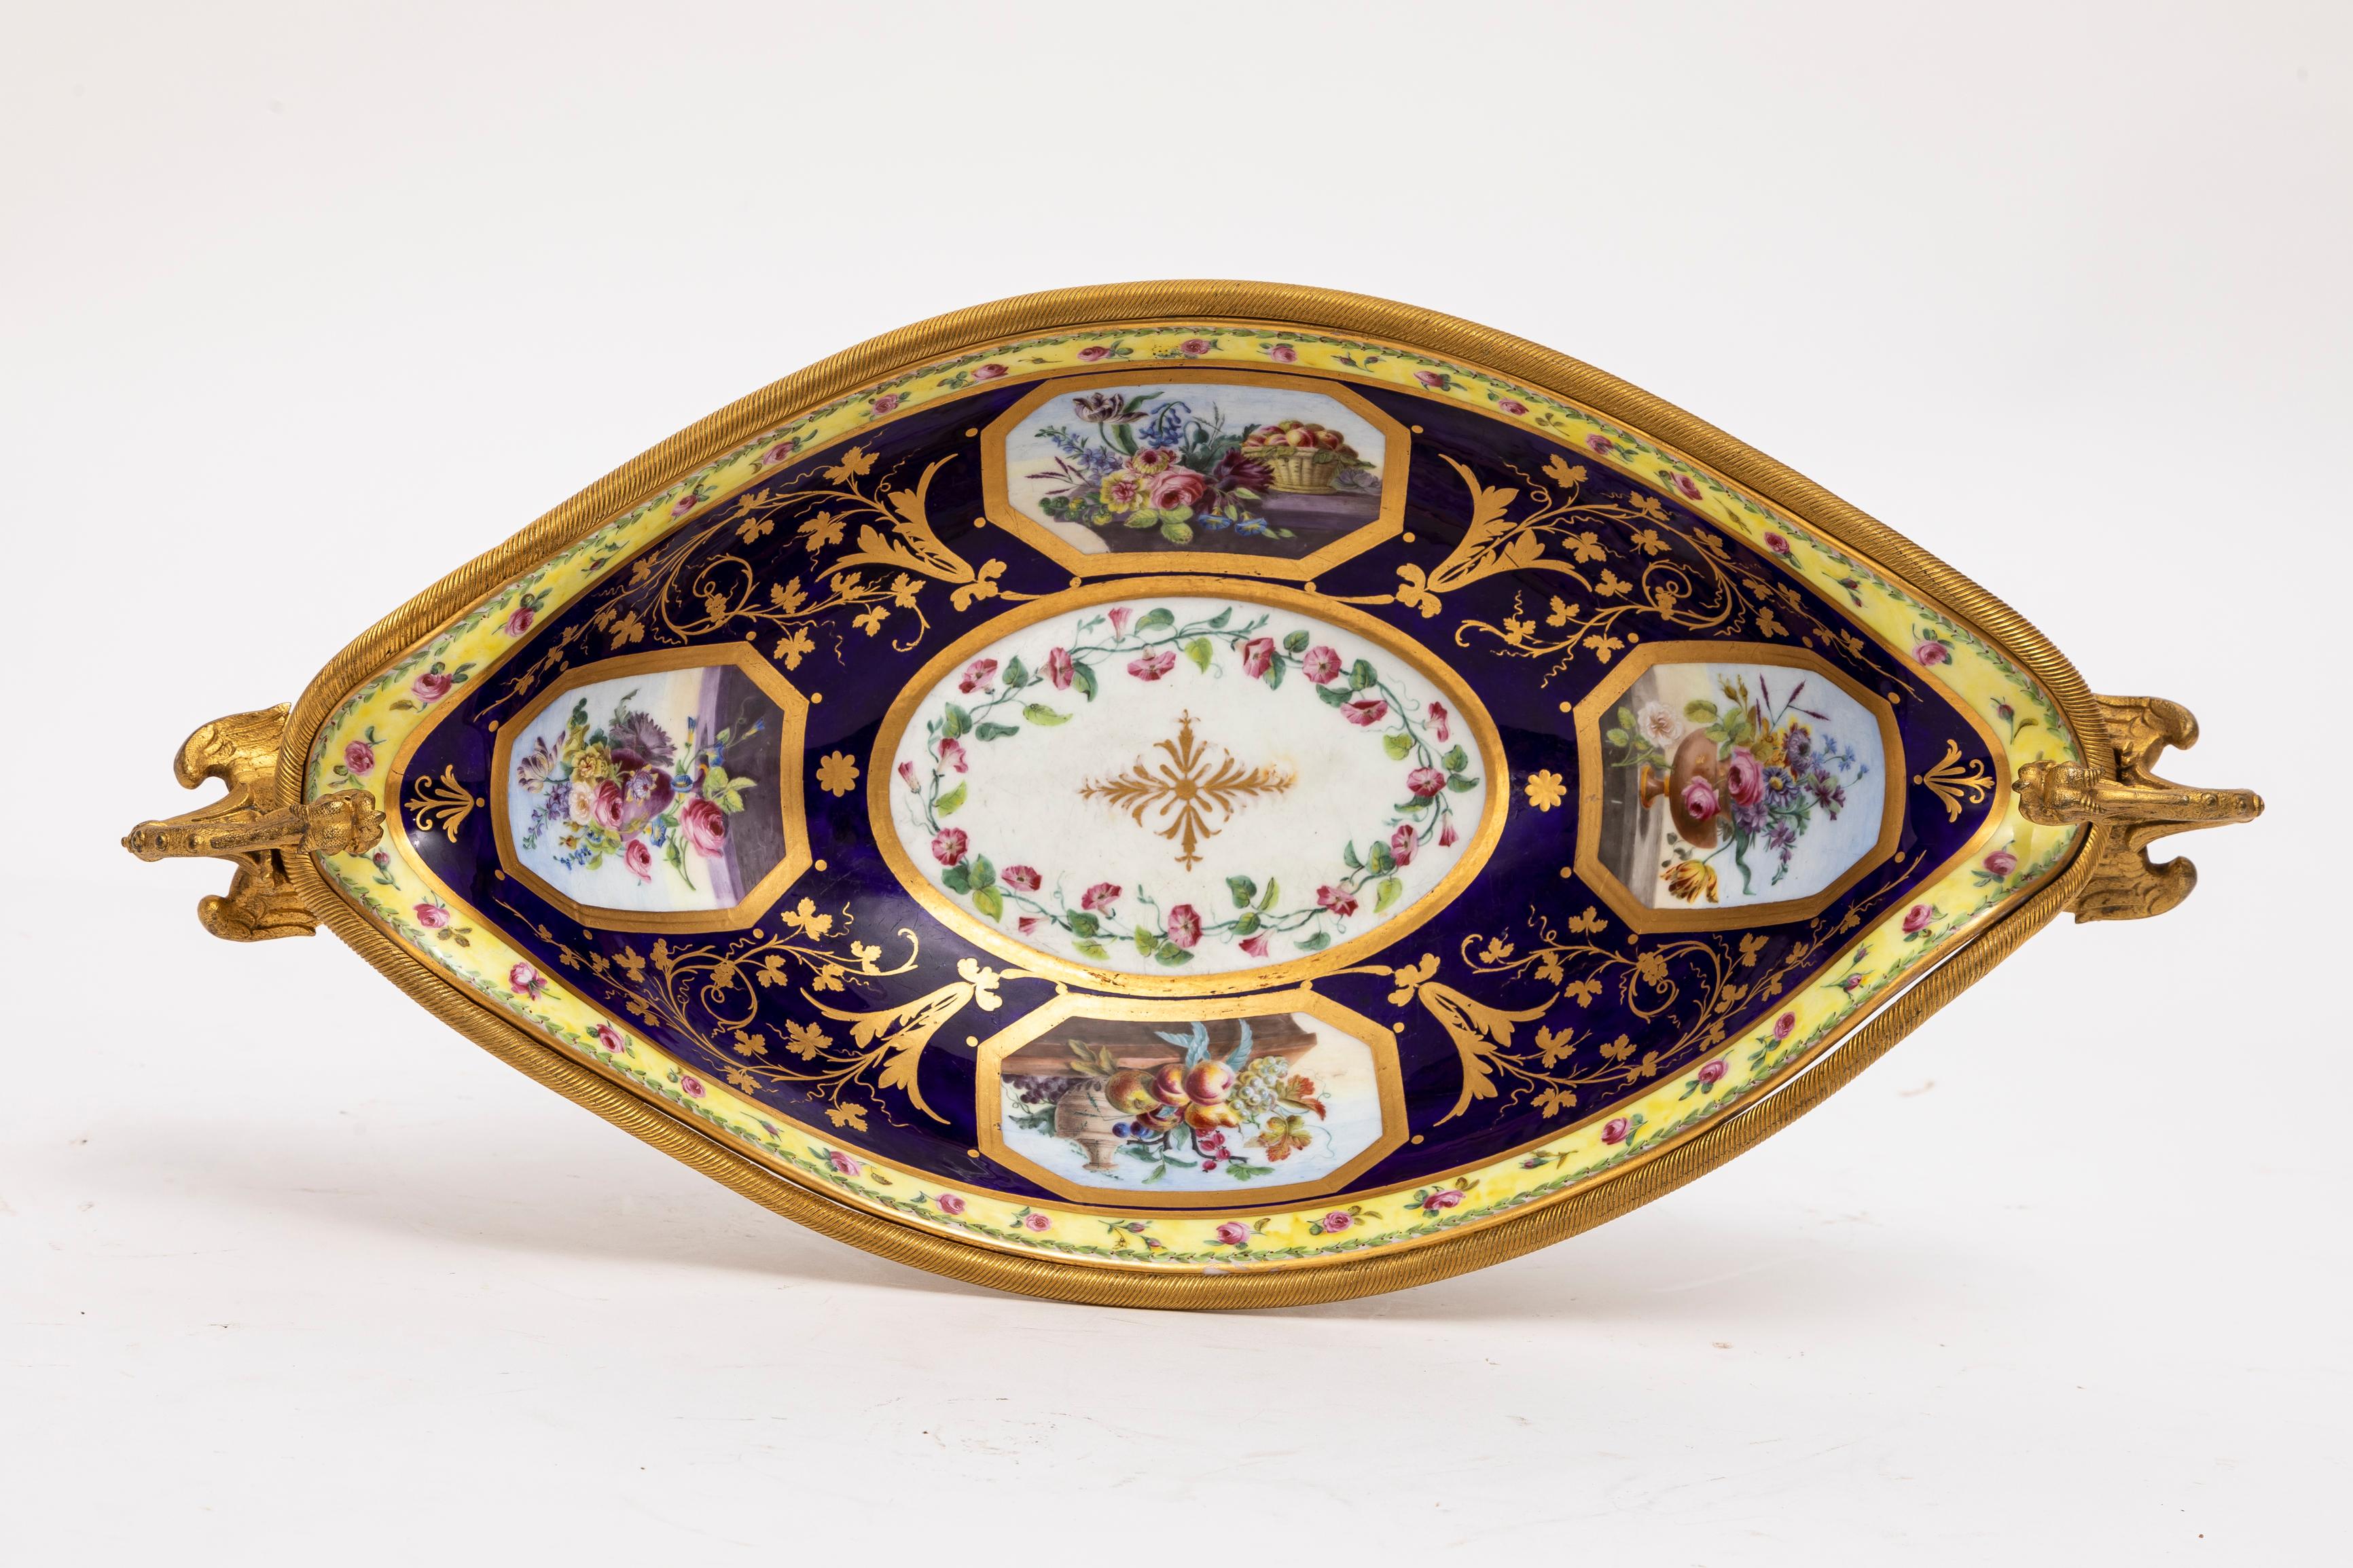 Gilt An 18th C. French Ormolu Mounted Sevres Porcelain Centerpiece w/ Dragon Handles For Sale